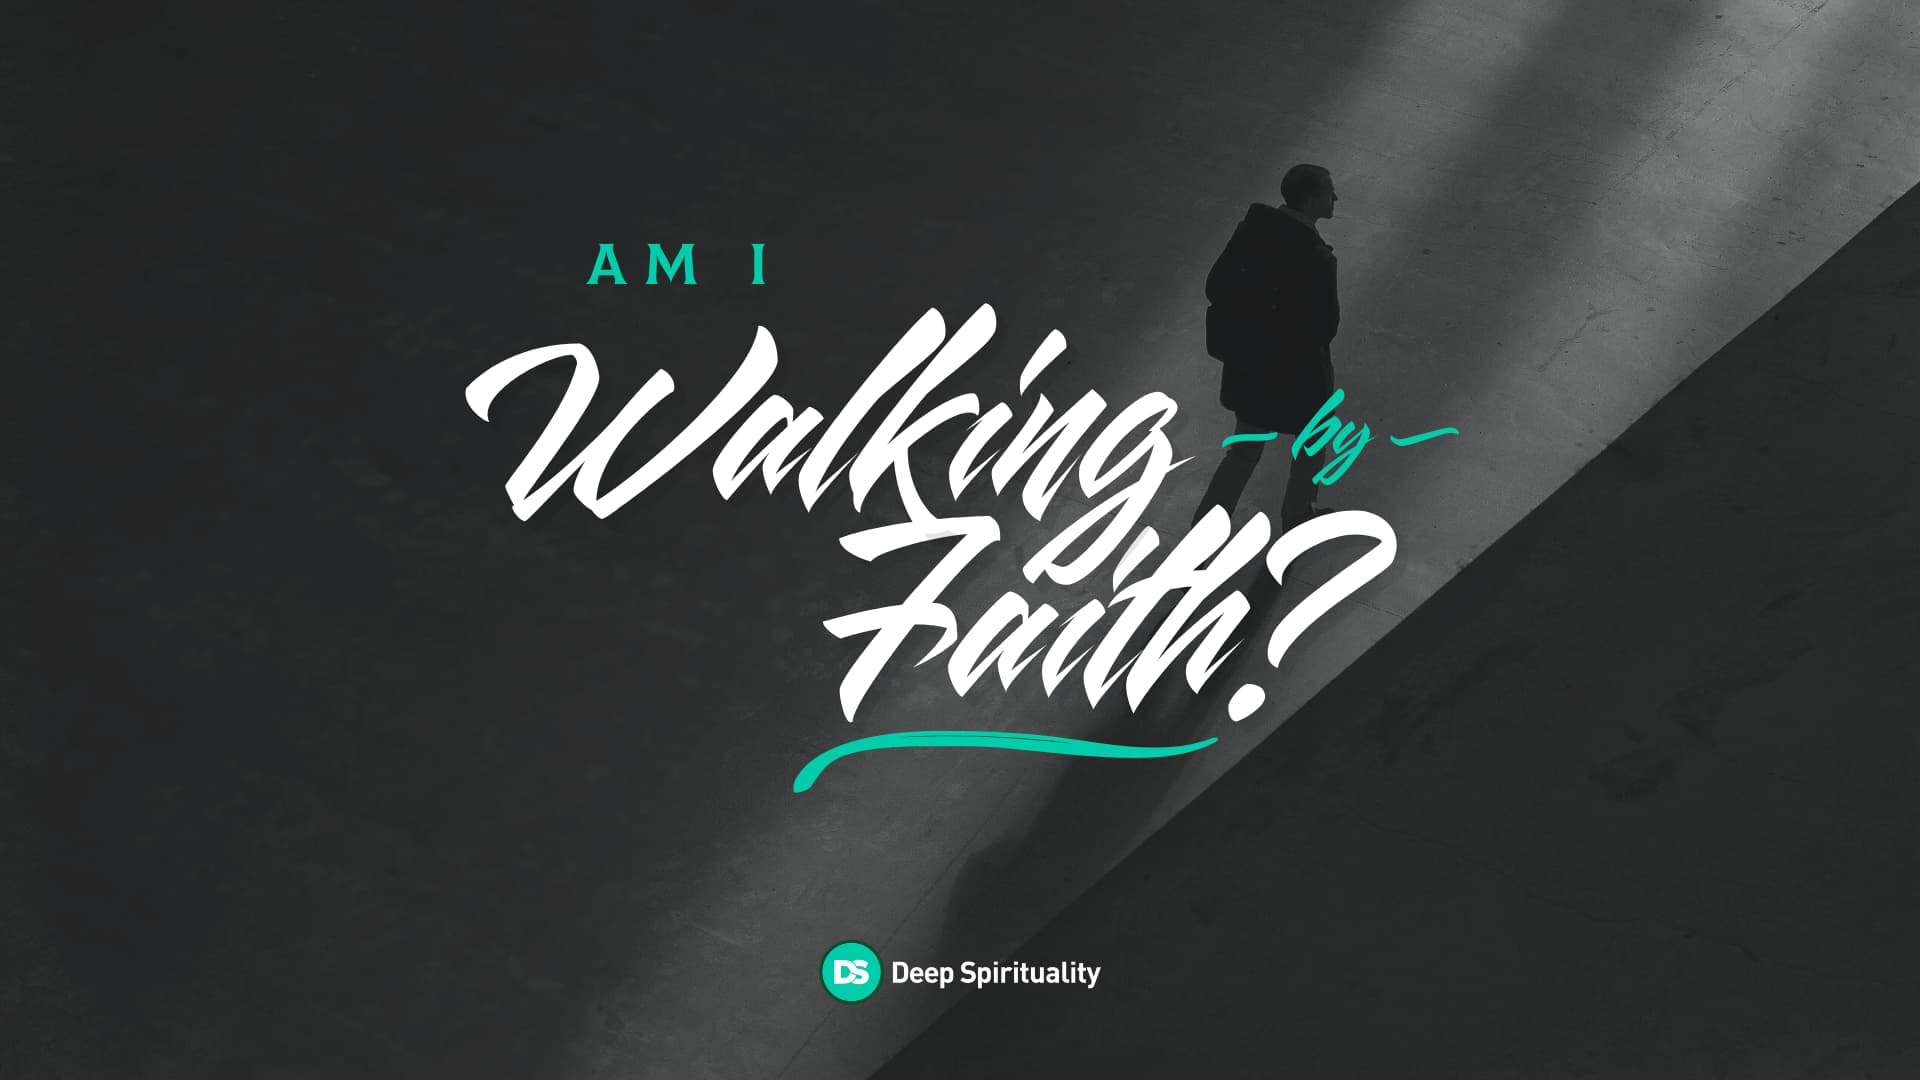 How Do I Know if I’m Walking by Faith? 4